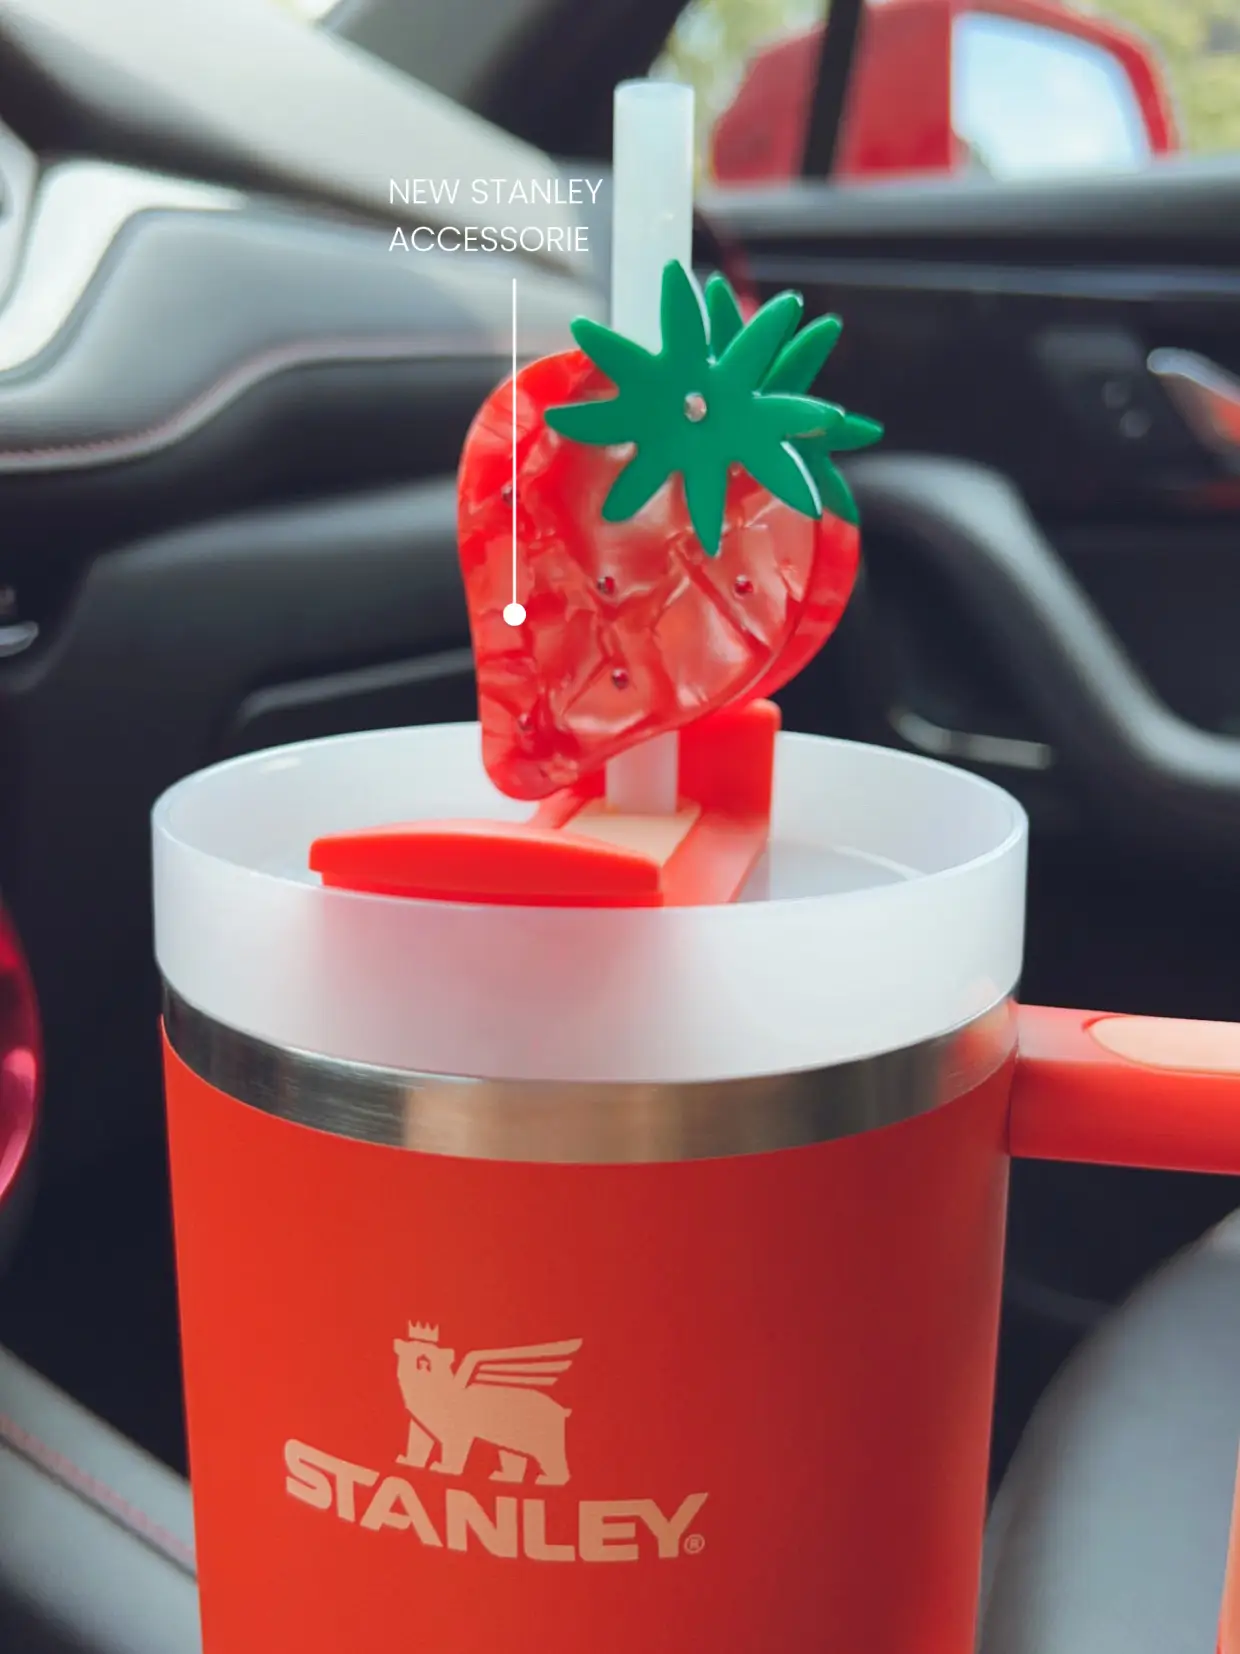 THE CUTEST STANLEY ACCESSORIE🍓